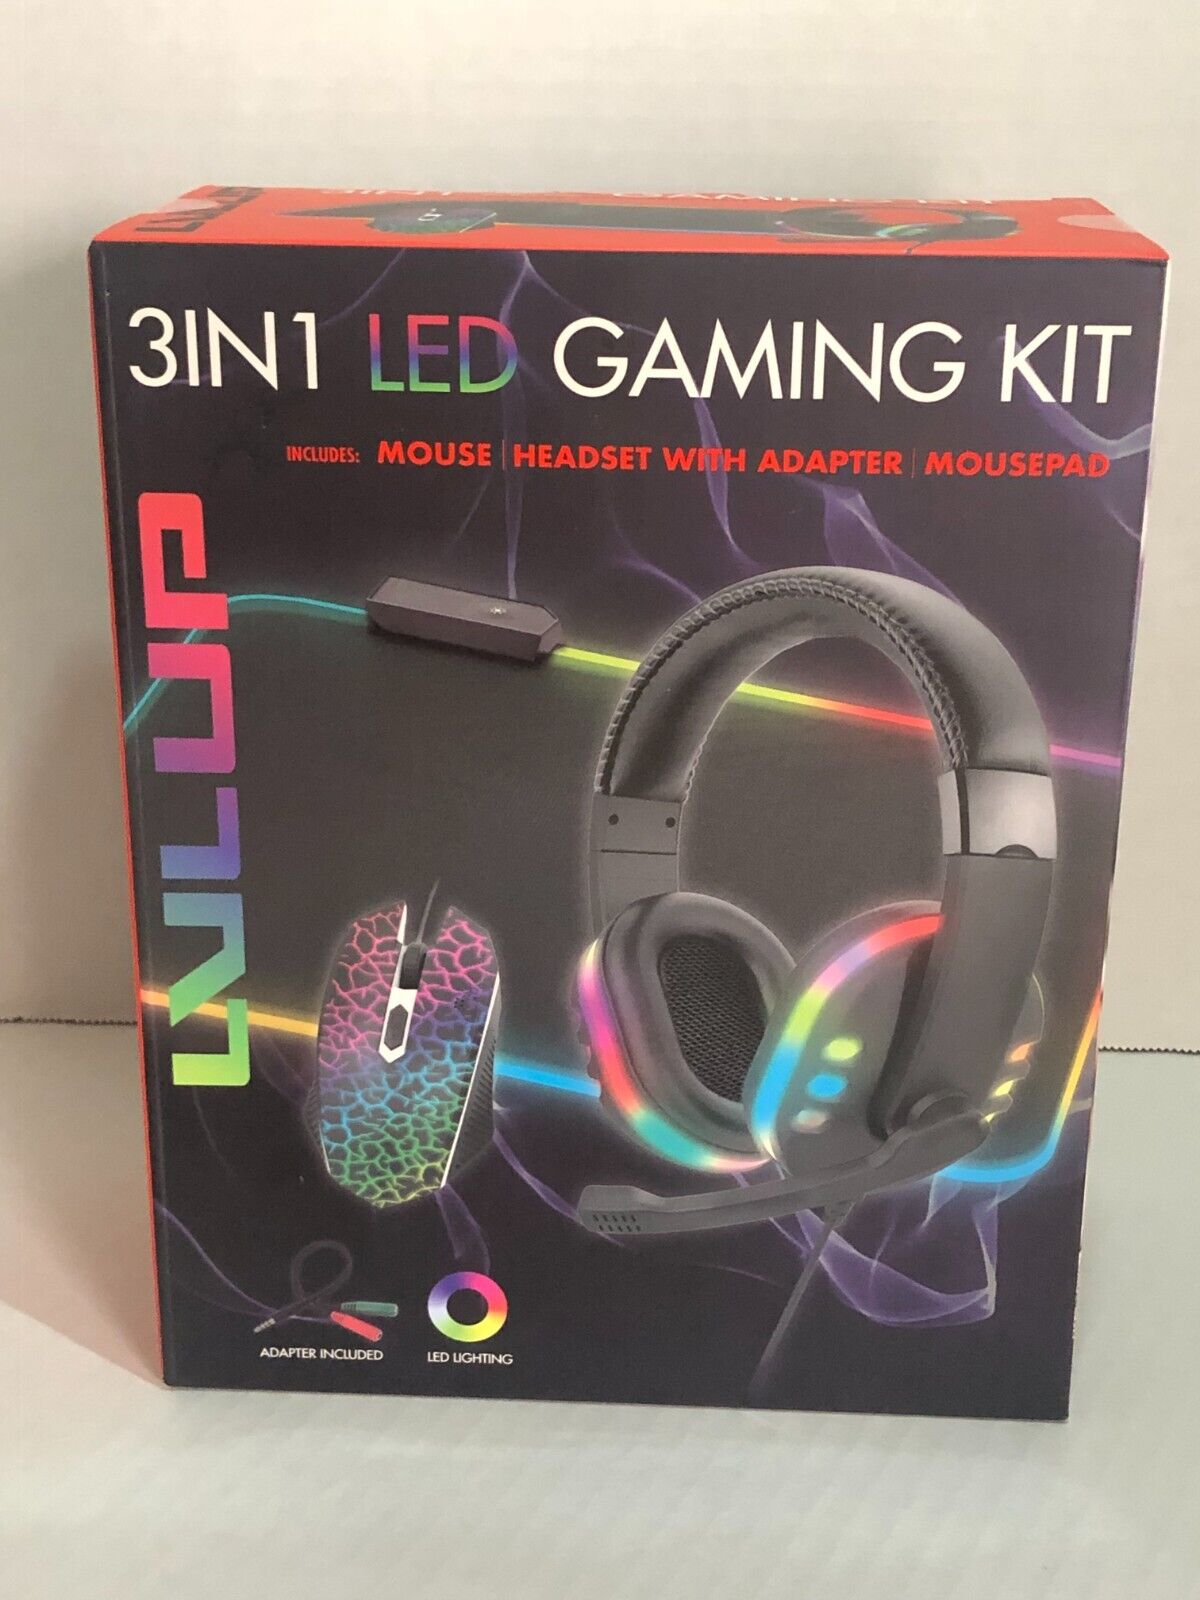 3 In 1 Led Gaming Kit Includes Mouse Headset With Adapter Mousepad